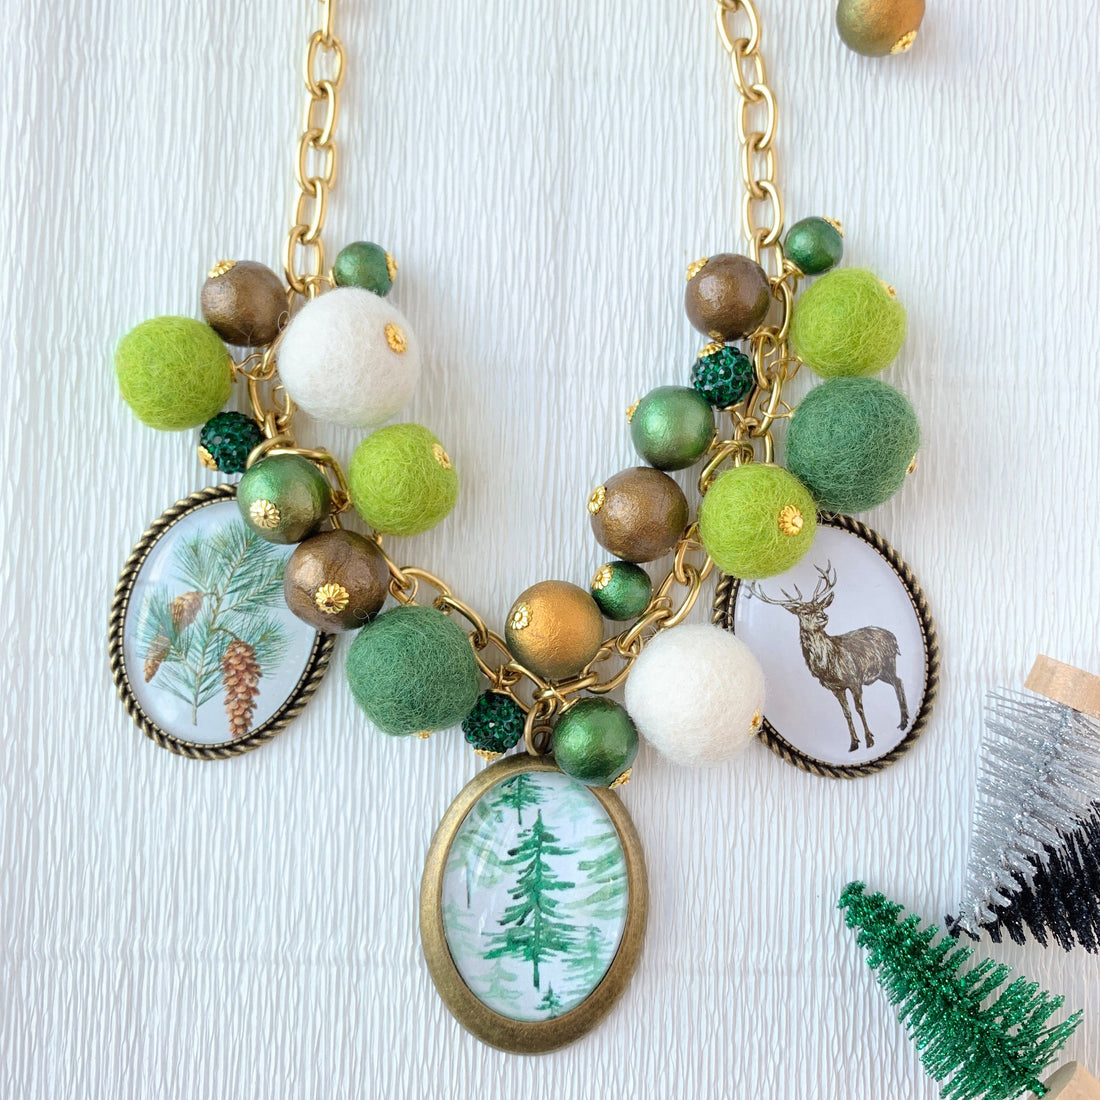 Lenora Dame Wintergreen Holiday Statement Necklace - One-of-a-Kind